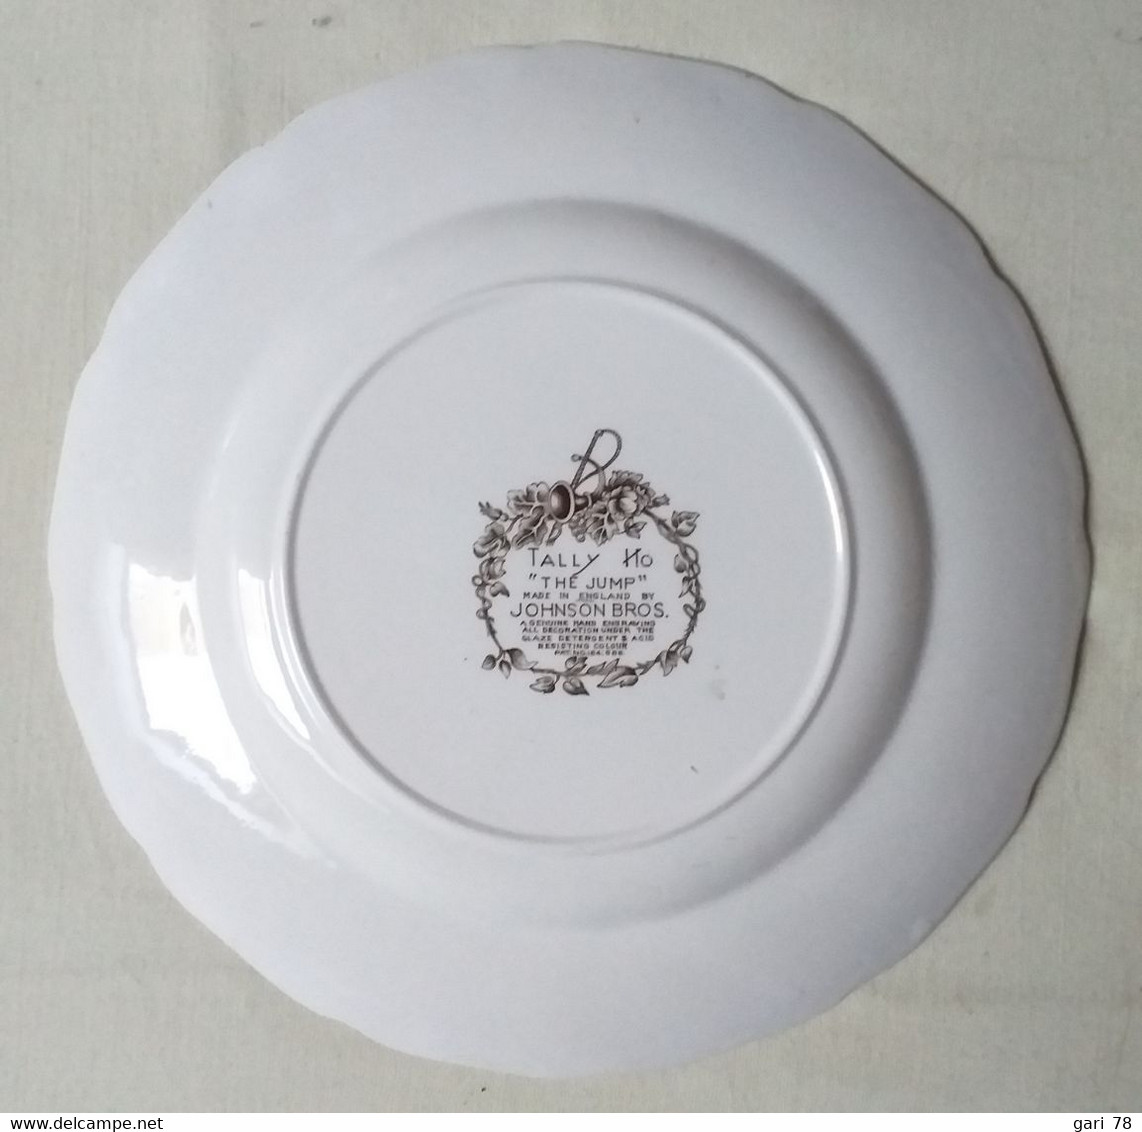 Assiette Tally Ho "The Jump" Made In England By Johnson Bros - Chasse à Courre - - Johnson Bros.